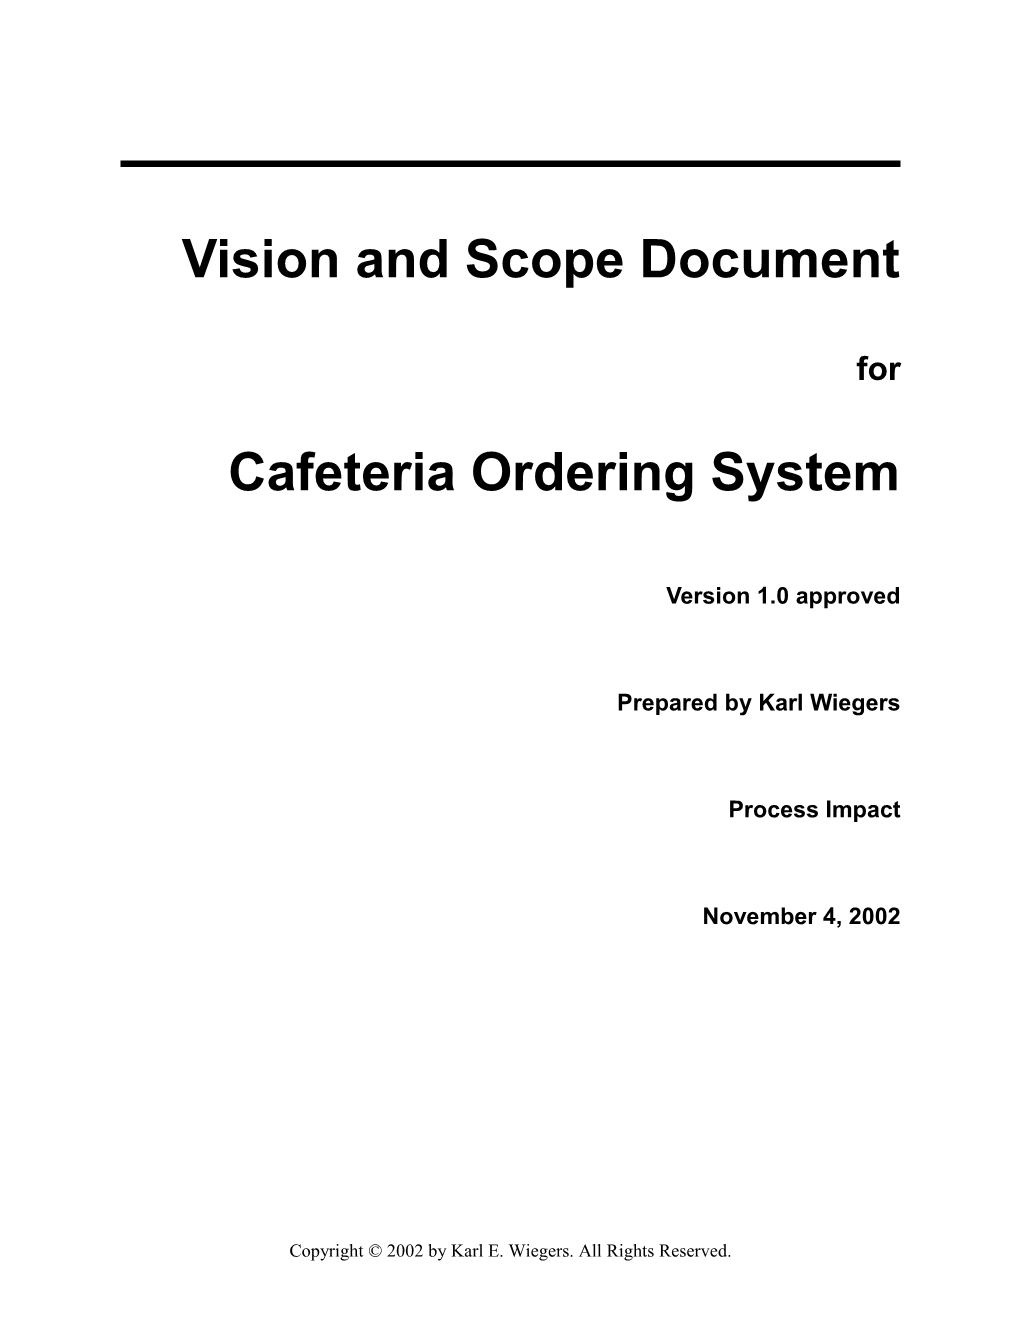 Vision and Scope for Cafeteria Ordering System